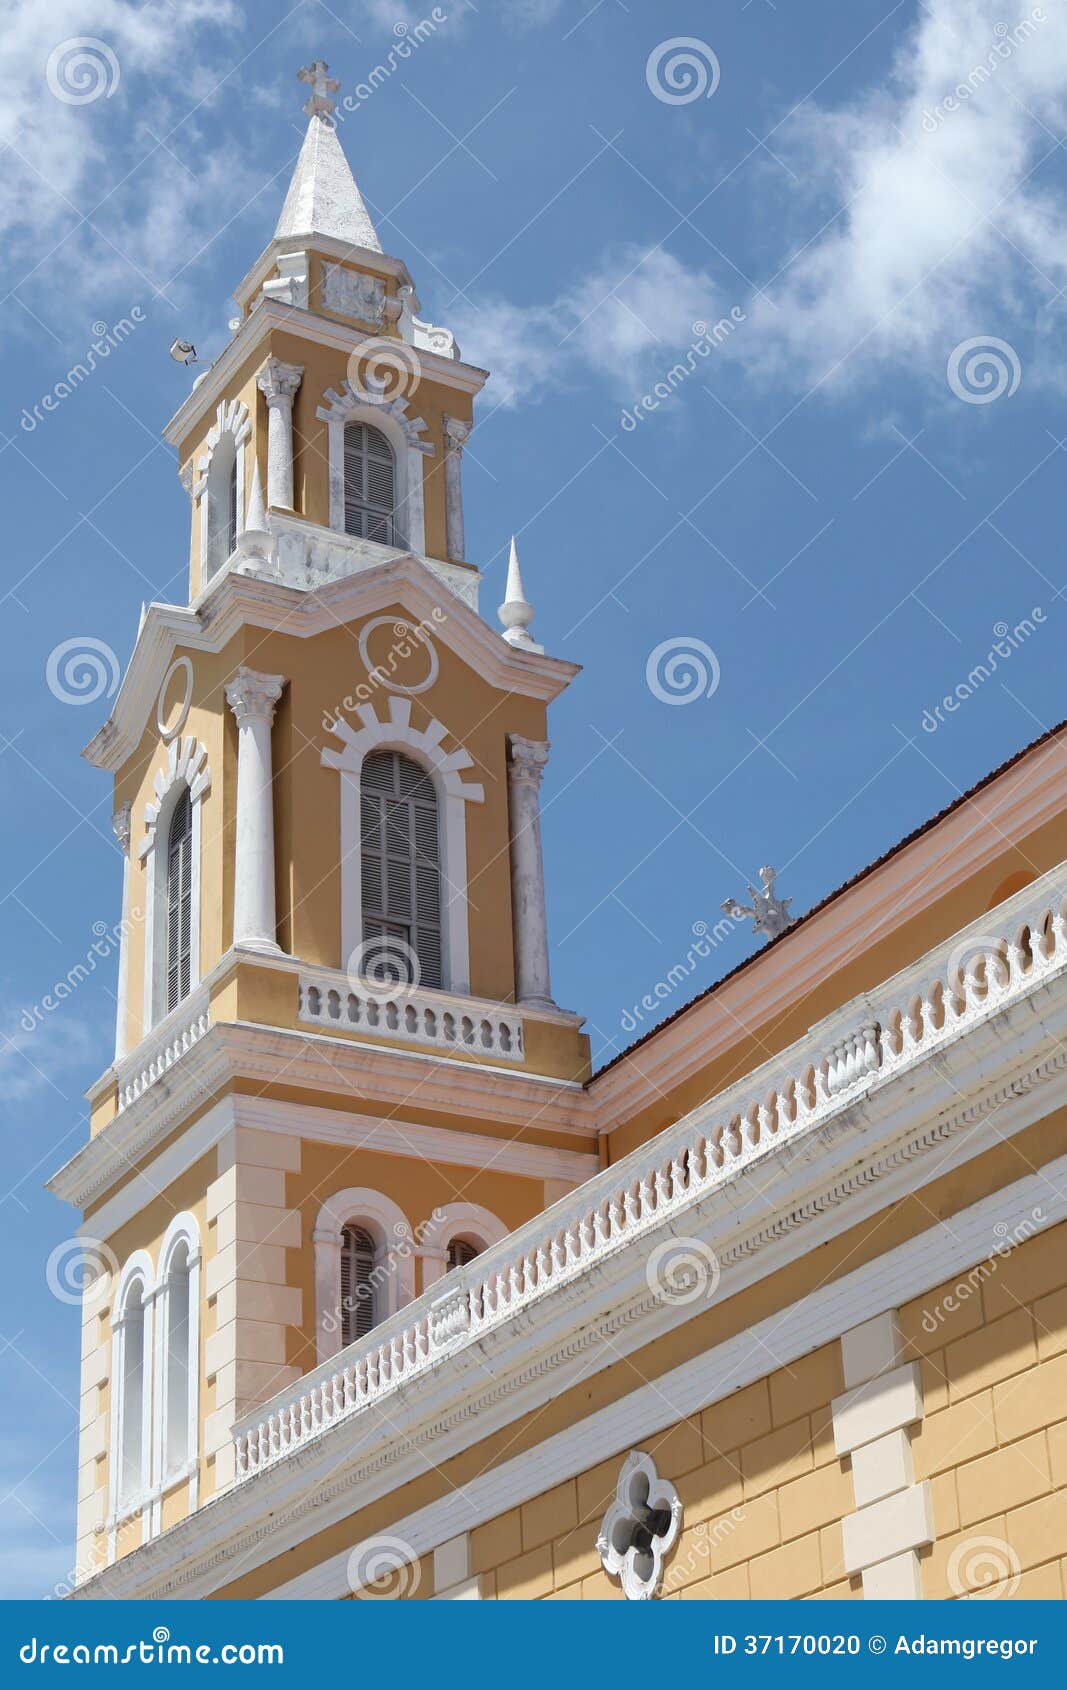 tower of a church in joao pessoa